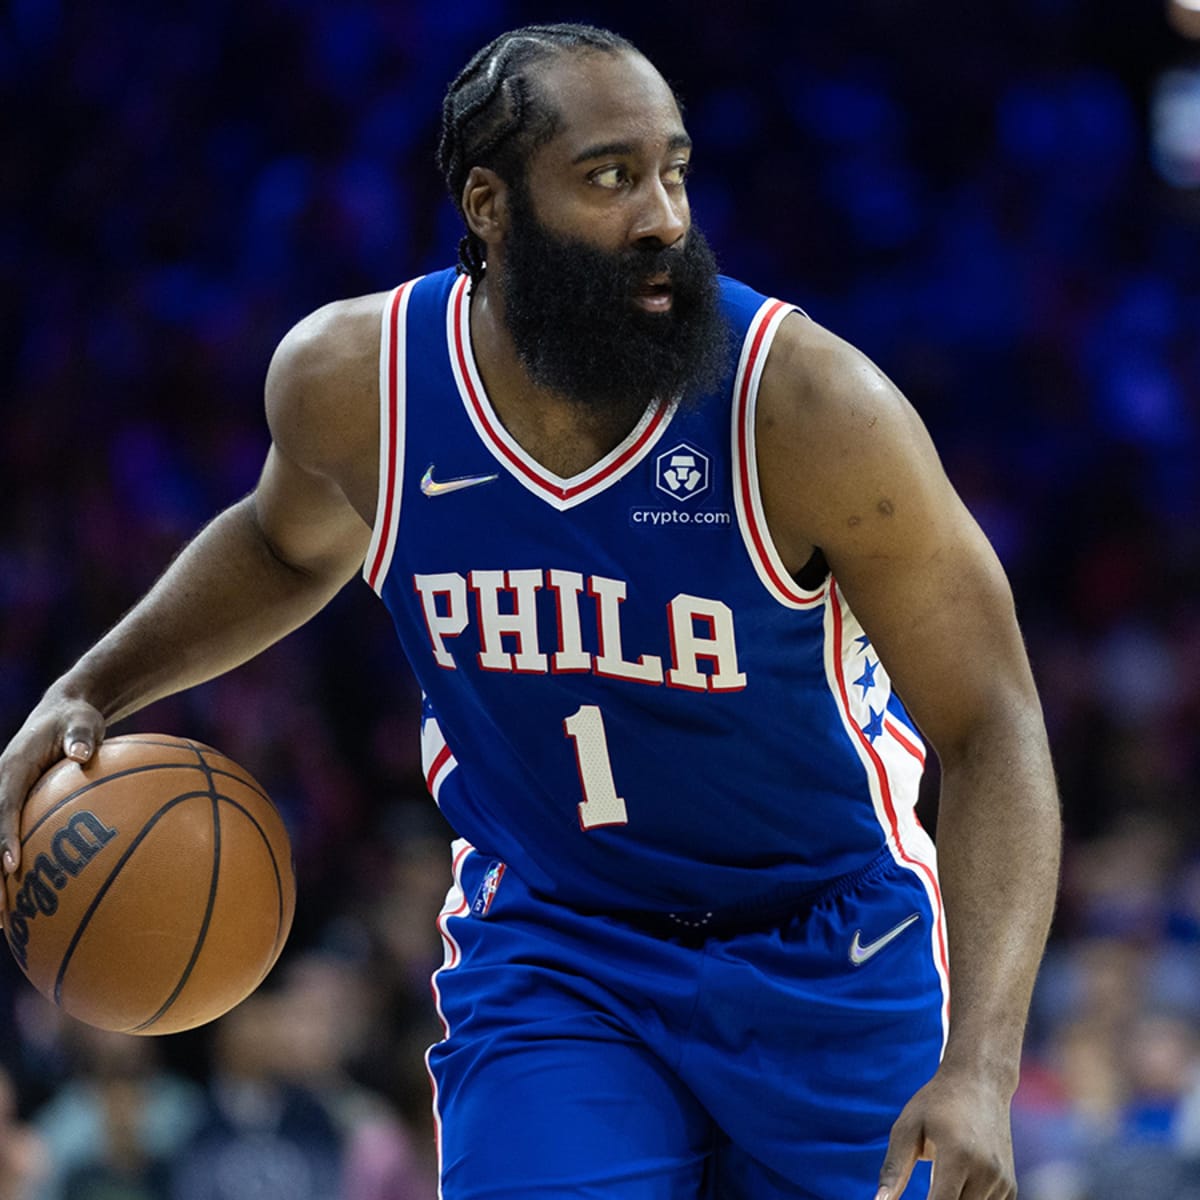 How to stop James Harden? Teams have no answer yet